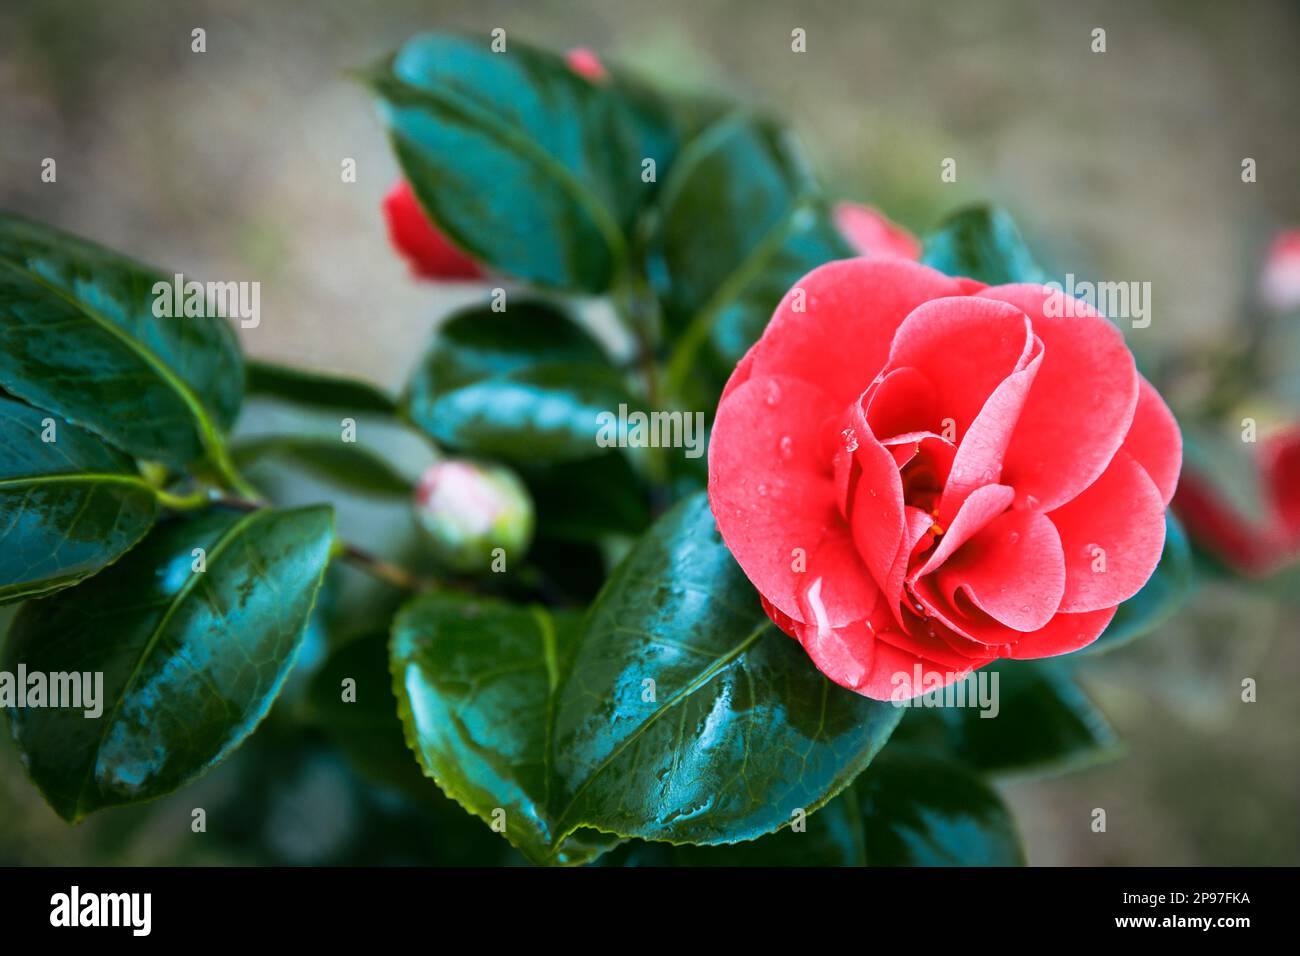 Camellia japonica or common camellia red flower in the garden design retro style Stock Photo